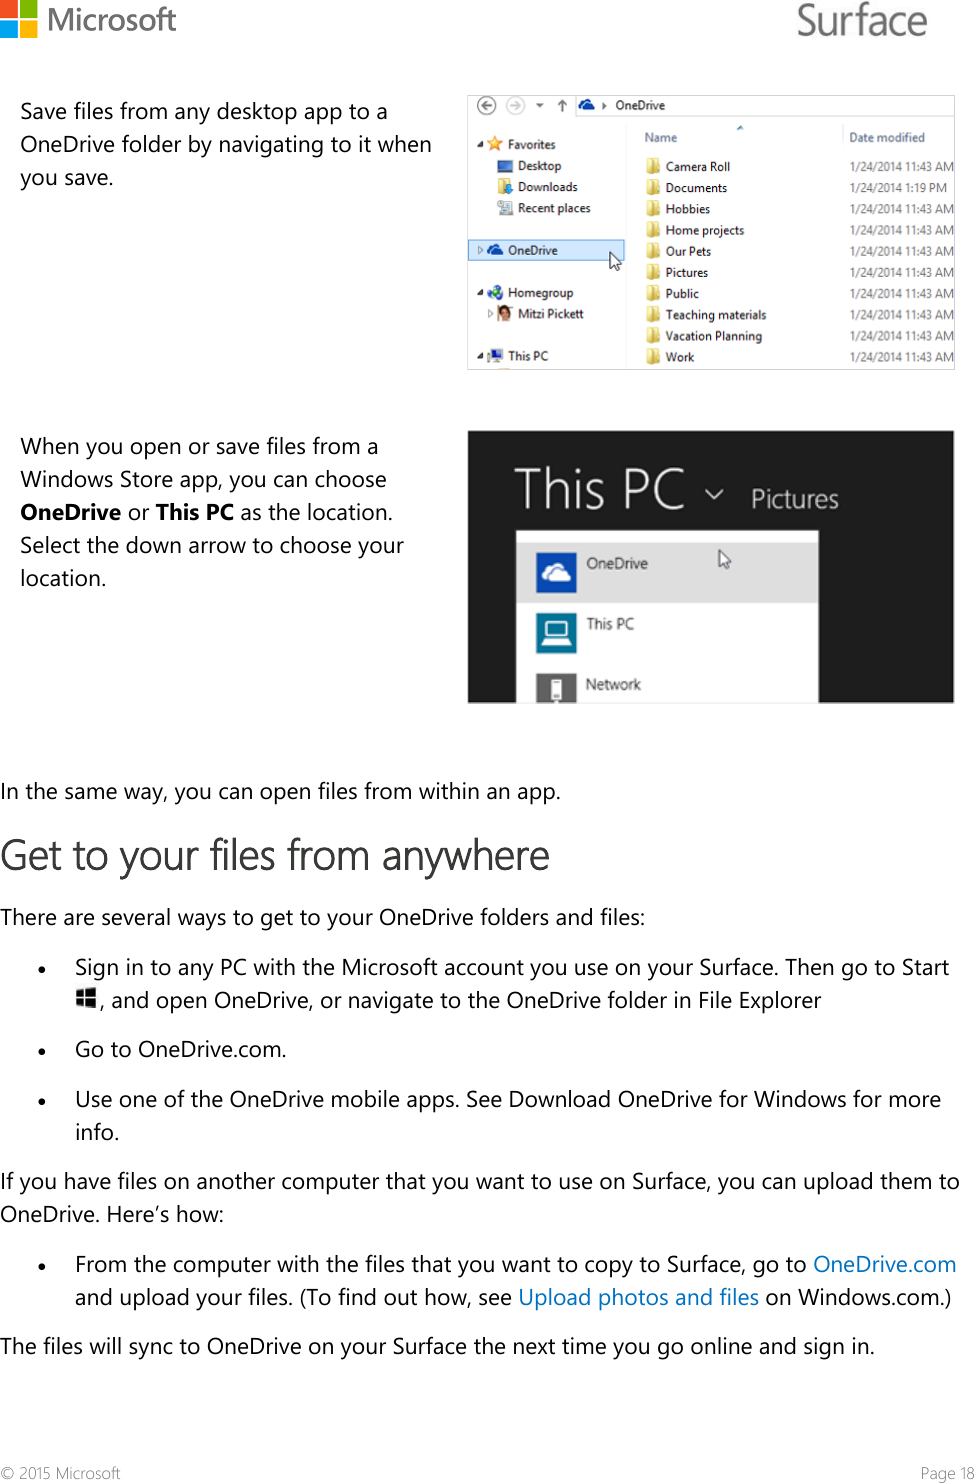    Save files from any desktop app to a OneDrive folder by navigating to it when you save.  When you open or save files from a Windows Store app, you can choose OneDrive or This PC as the location. Select the down arrow to choose your location.    In the same way, you can open files from within an app.  Get to your files from anywhere There are several ways to get to your OneDrive folders and files: • Sign in to any PC with the Microsoft account you use on your Surface. Then go to Start , and open OneDrive, or navigate to the OneDrive folder in File Explorer • Go to OneDrive.com.  • Use one of the OneDrive mobile apps. See Download OneDrive for Windows for more info. If you have files on another computer that you want to use on Surface, you can upload them to OneDrive. Here’s how:  • From the computer with the files that you want to copy to Surface, go to OneDrive.com and upload your files. (To find out how, see Upload photos and files on Windows.com.) The files will sync to OneDrive on your Surface the next time you go online and sign in.  © 2015 Microsoft    Page 18 